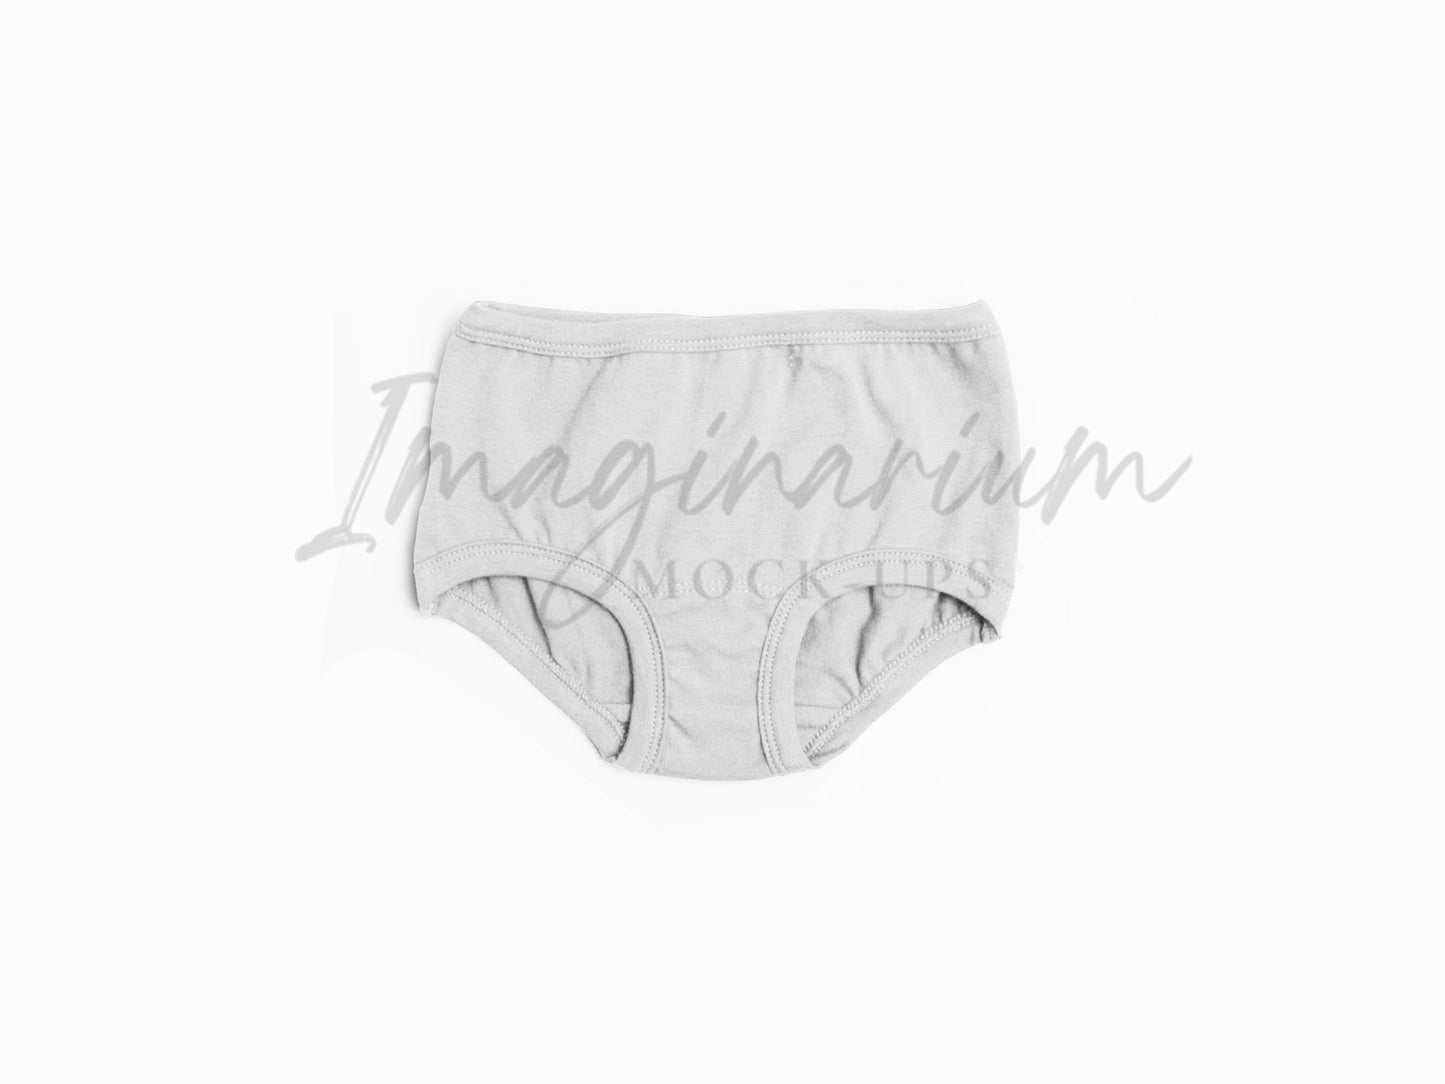 Gus + Steel Unders  Underwear Mock Up, Realistic Clothing Mockup for Photoshop and Procreate